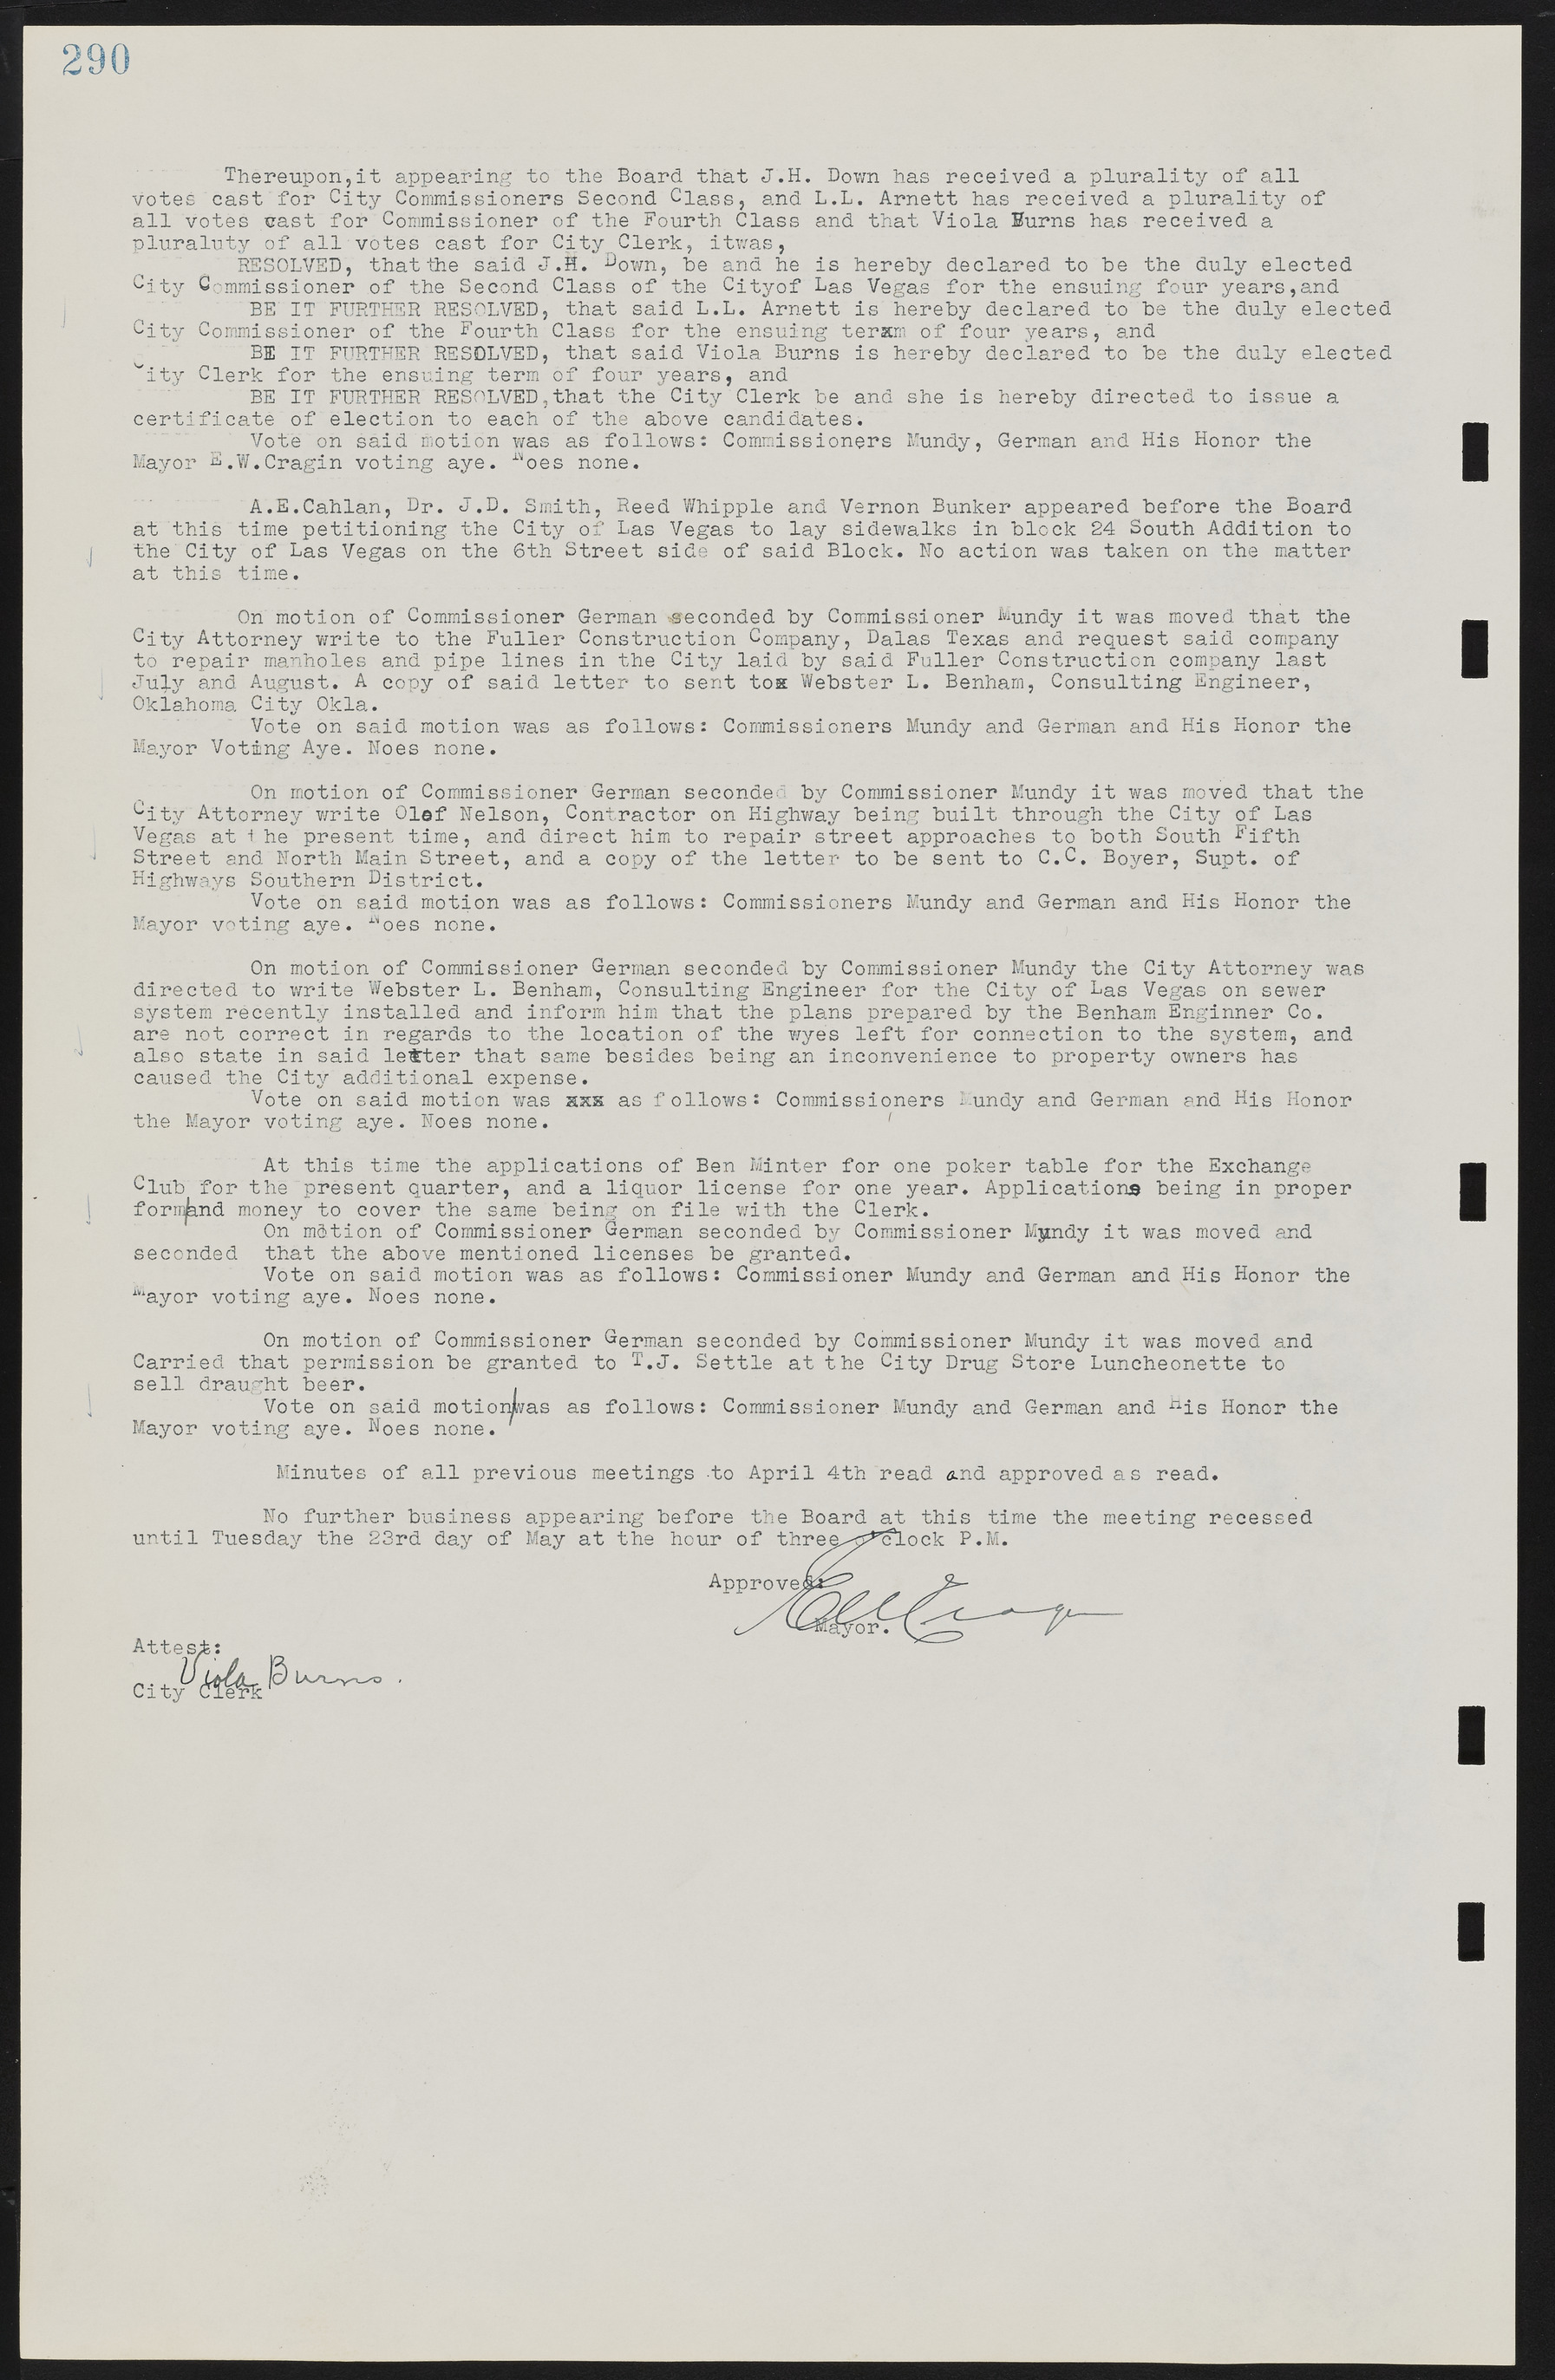 Las Vegas City Commission Minutes, May 14, 1929 to February 11, 1937, lvc000003-297